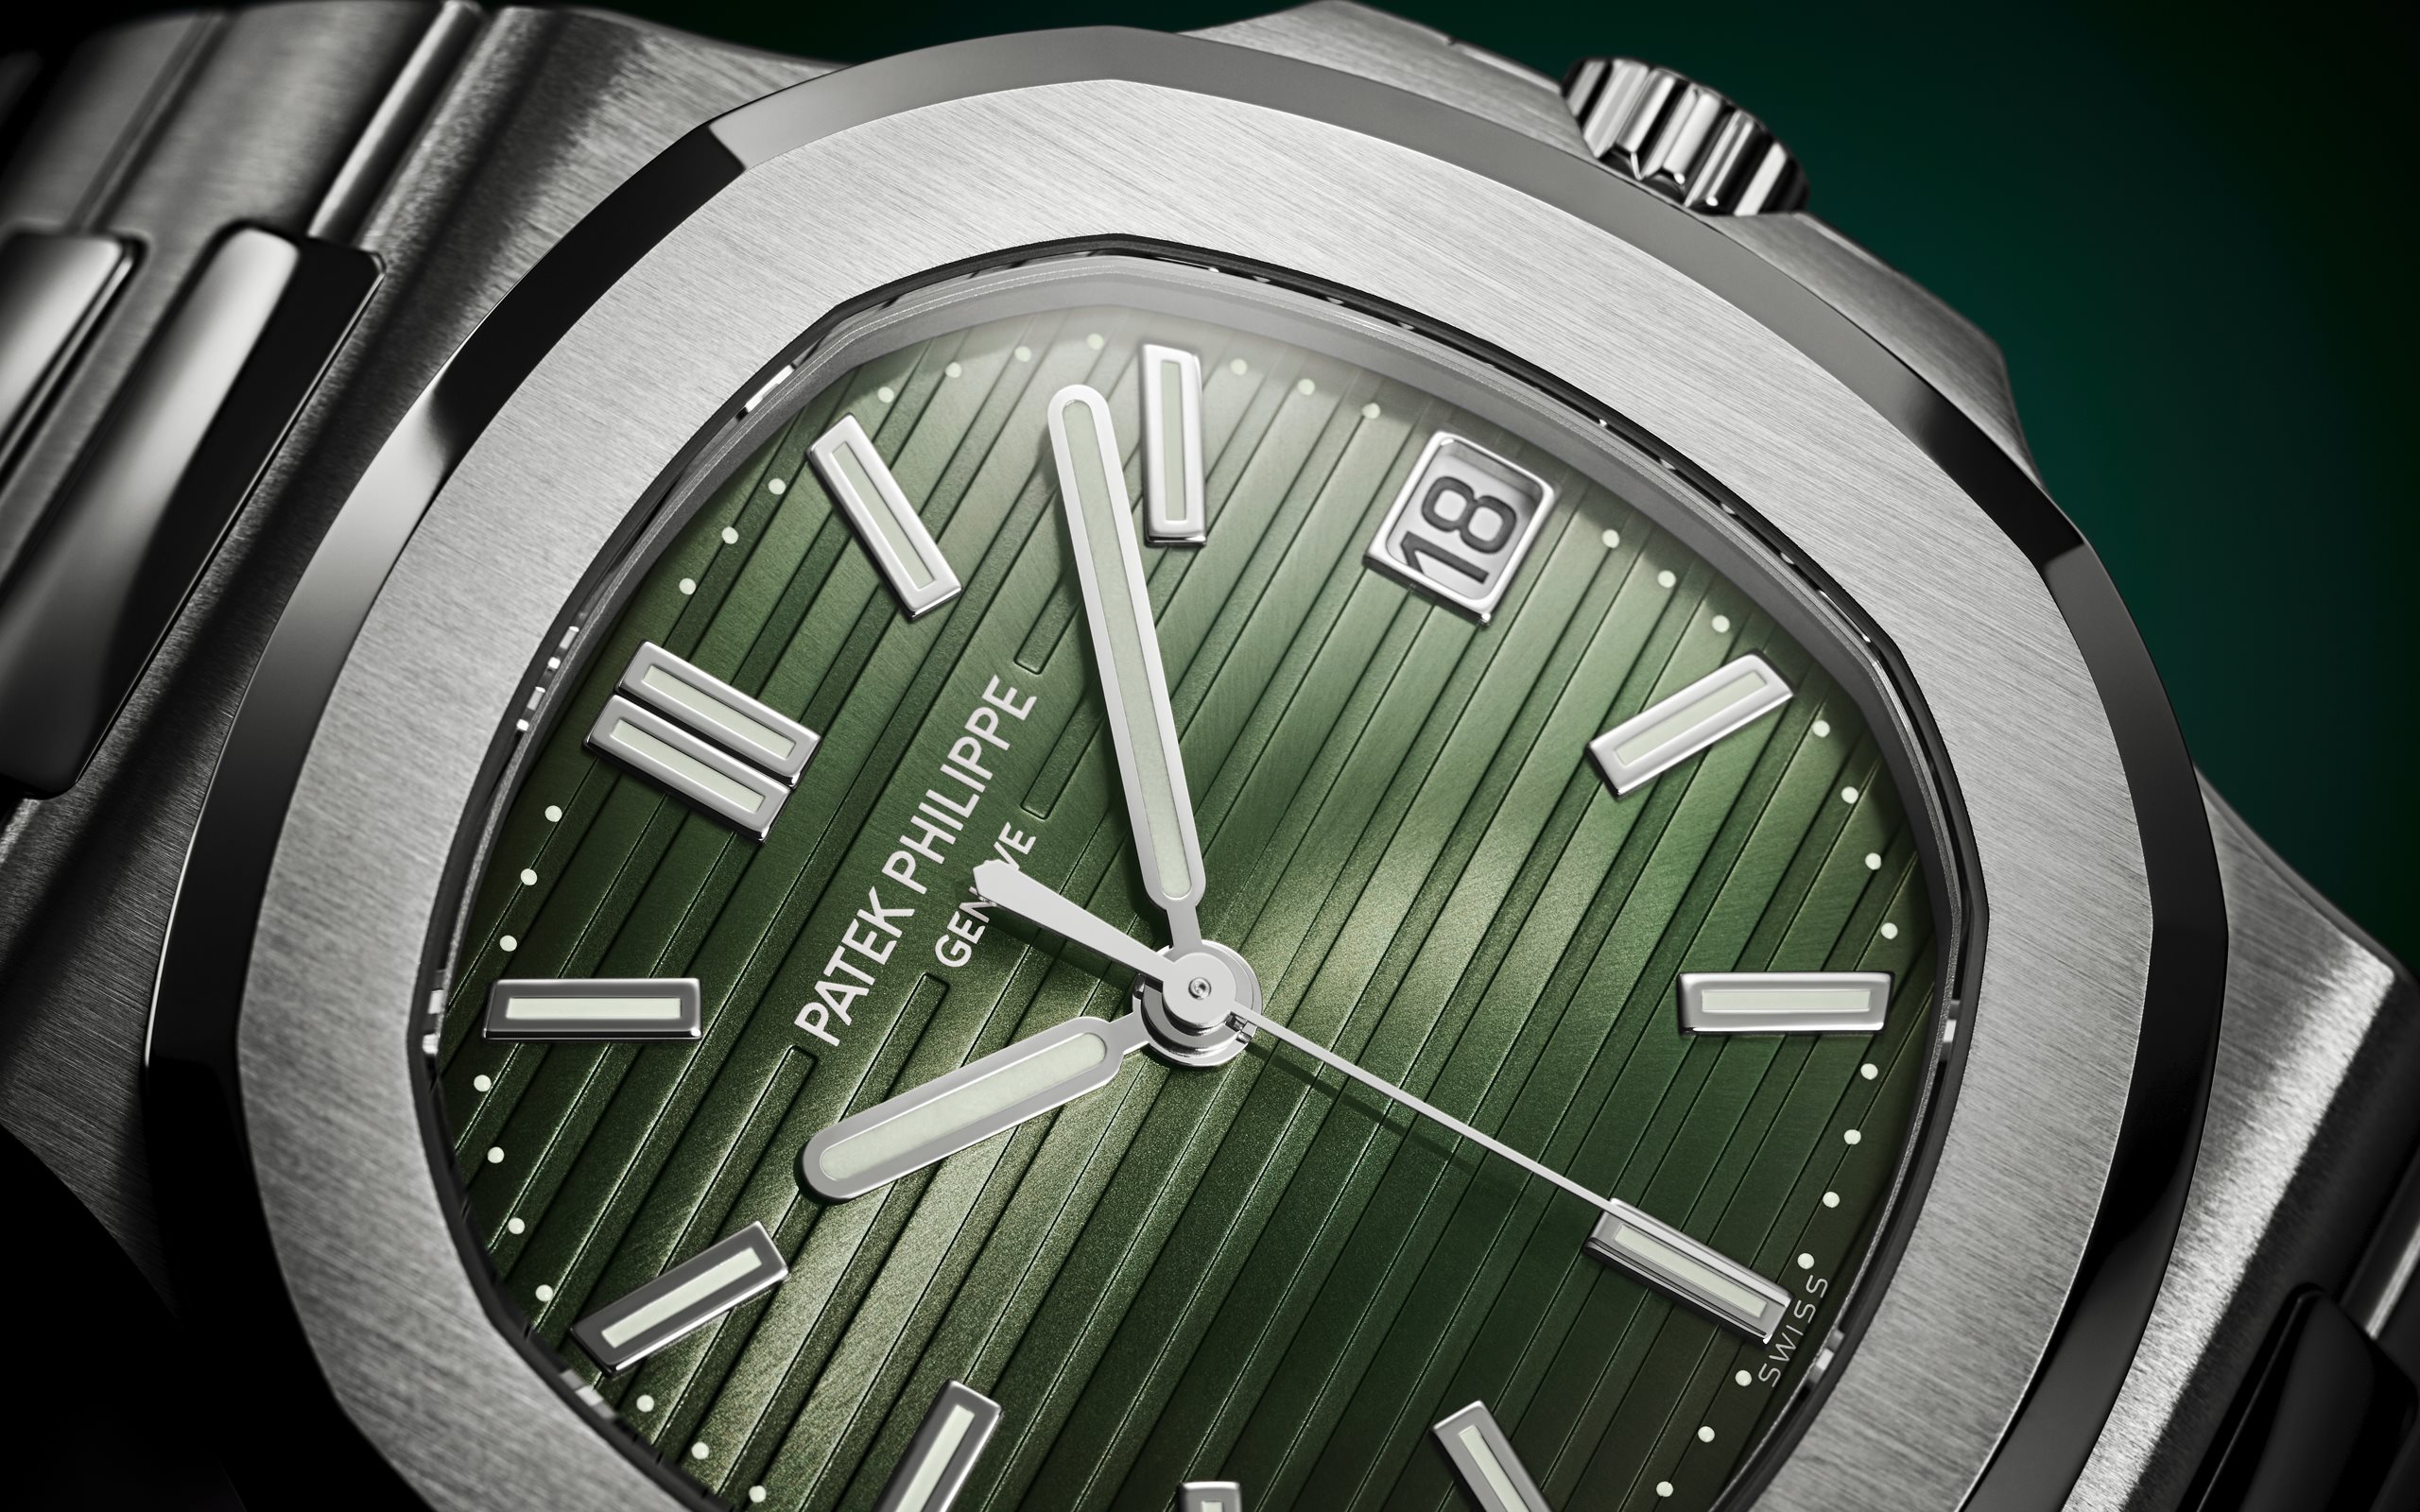 Three New Patek Philippe Nautilus Models (One Steel With A Blue Dial)